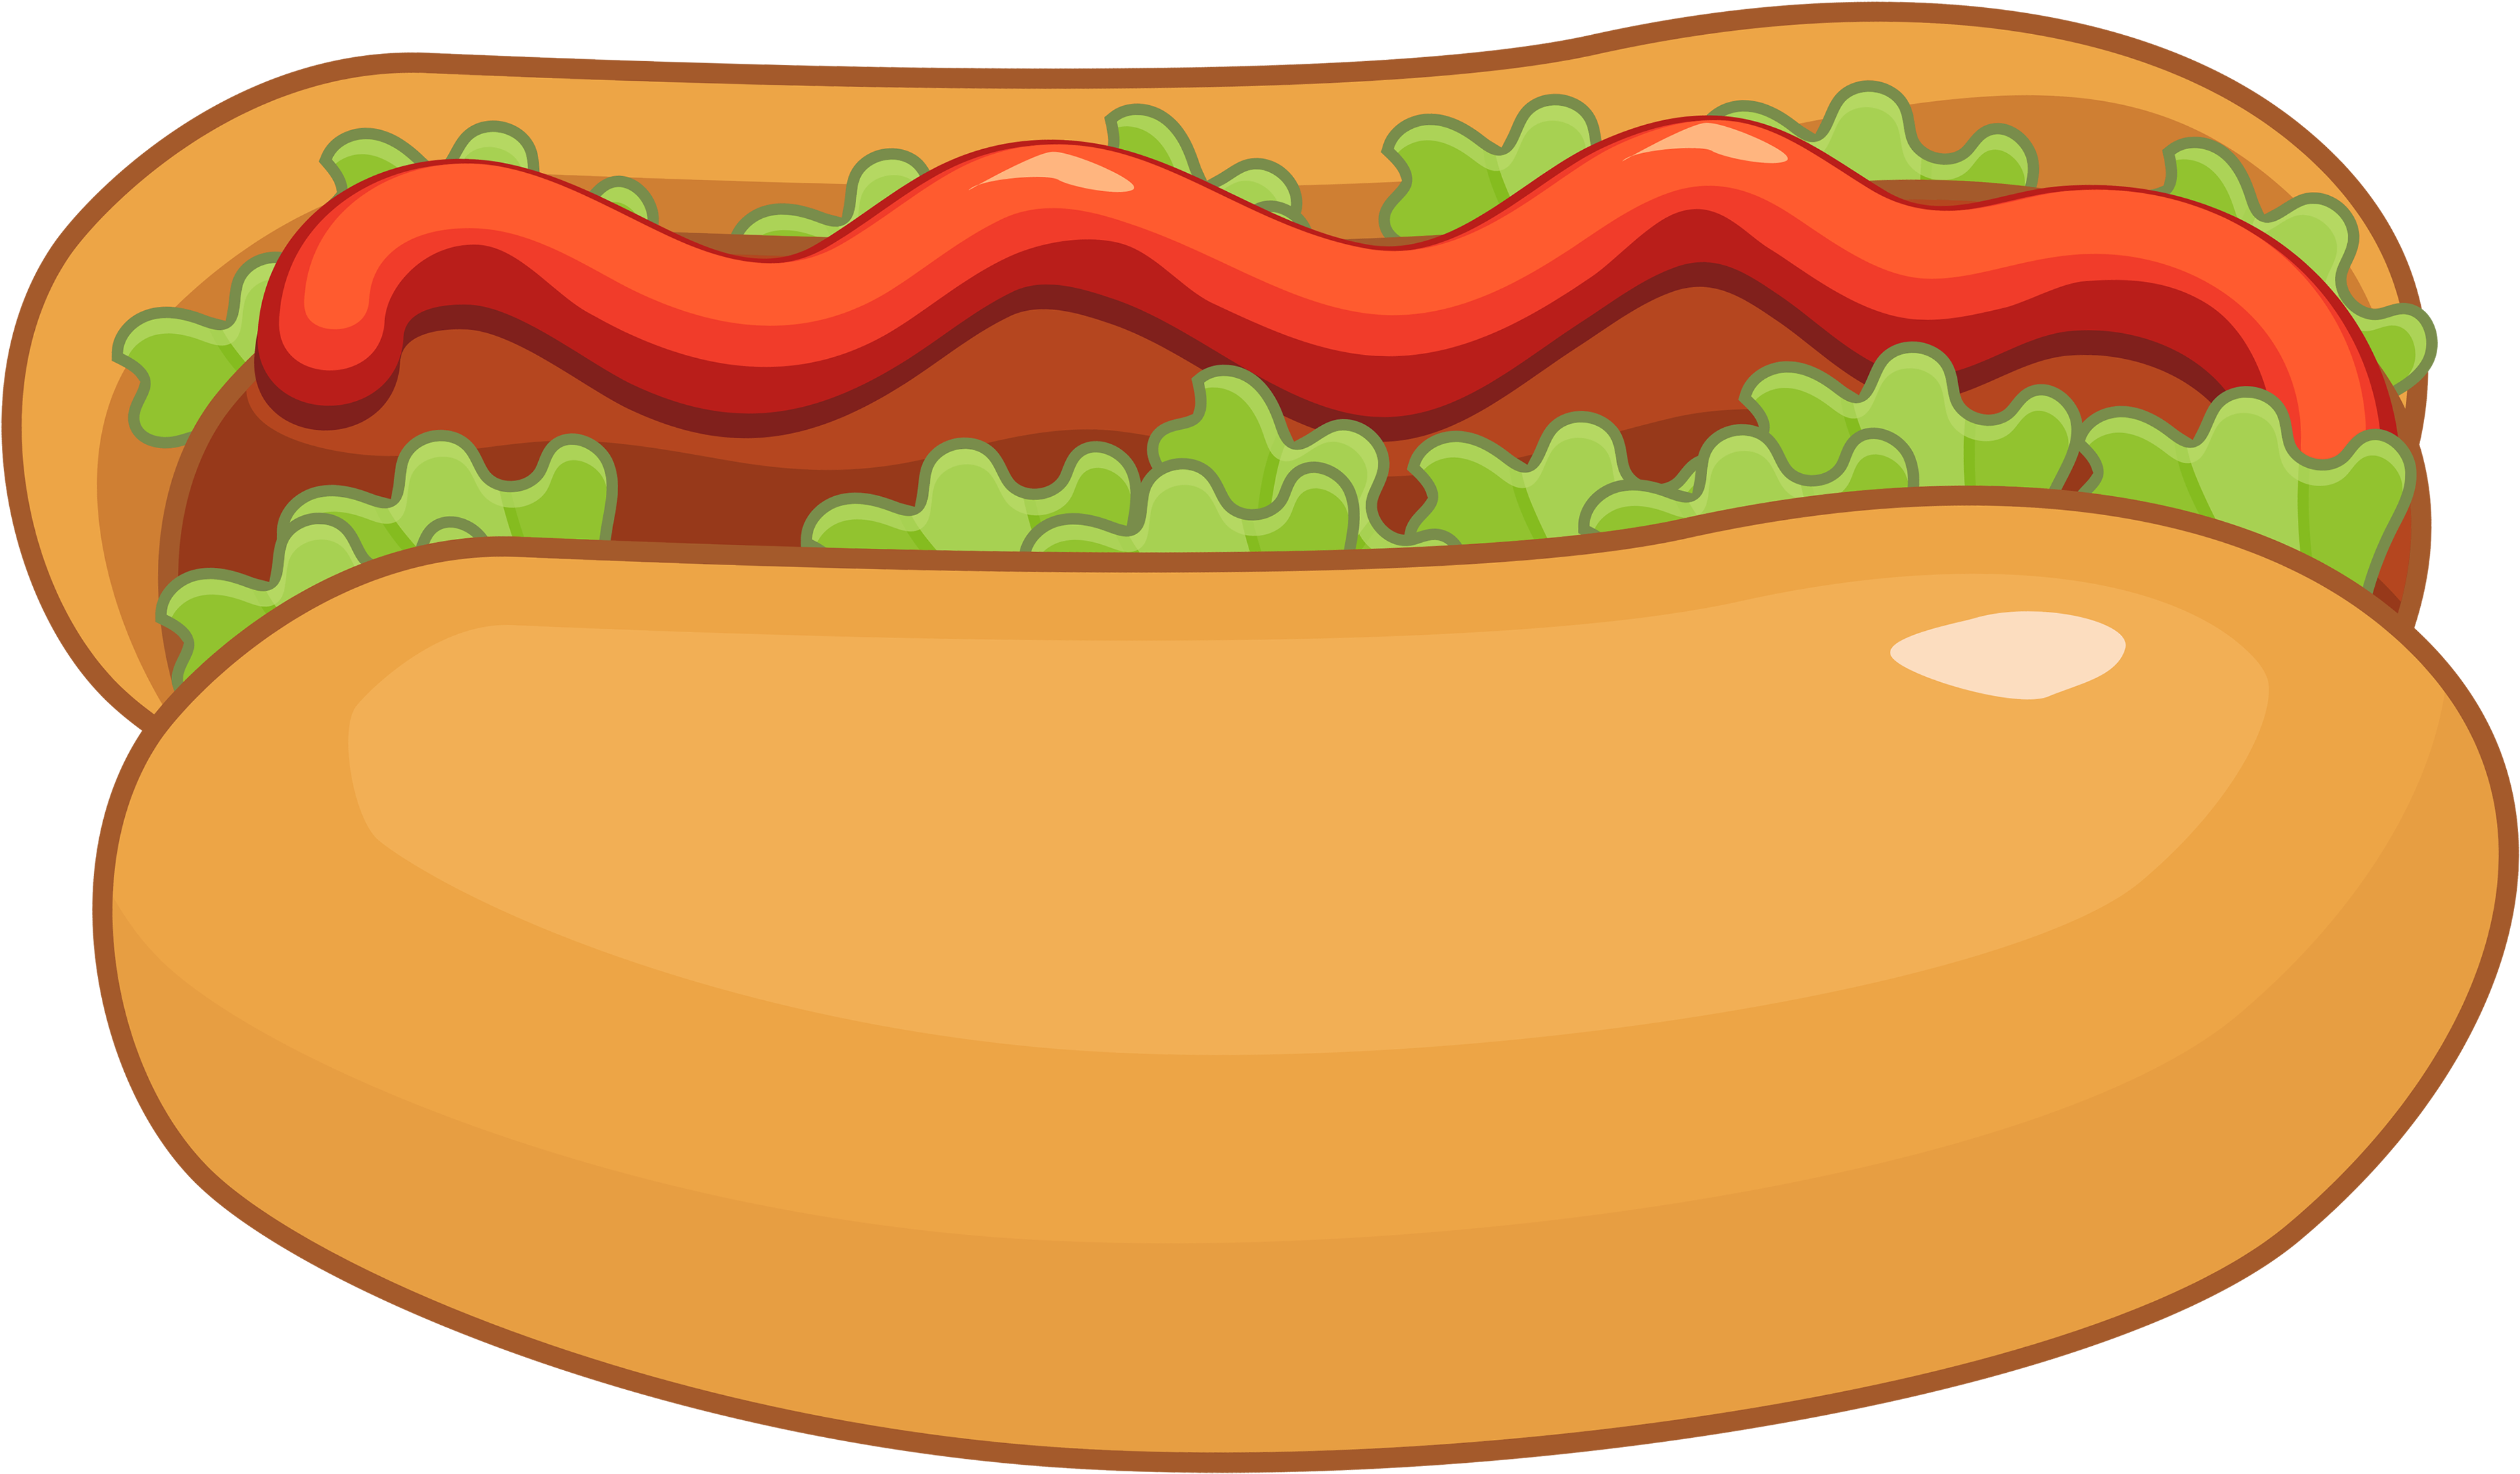 A Cartoon Hot Dog With Ketchup And Lettuce